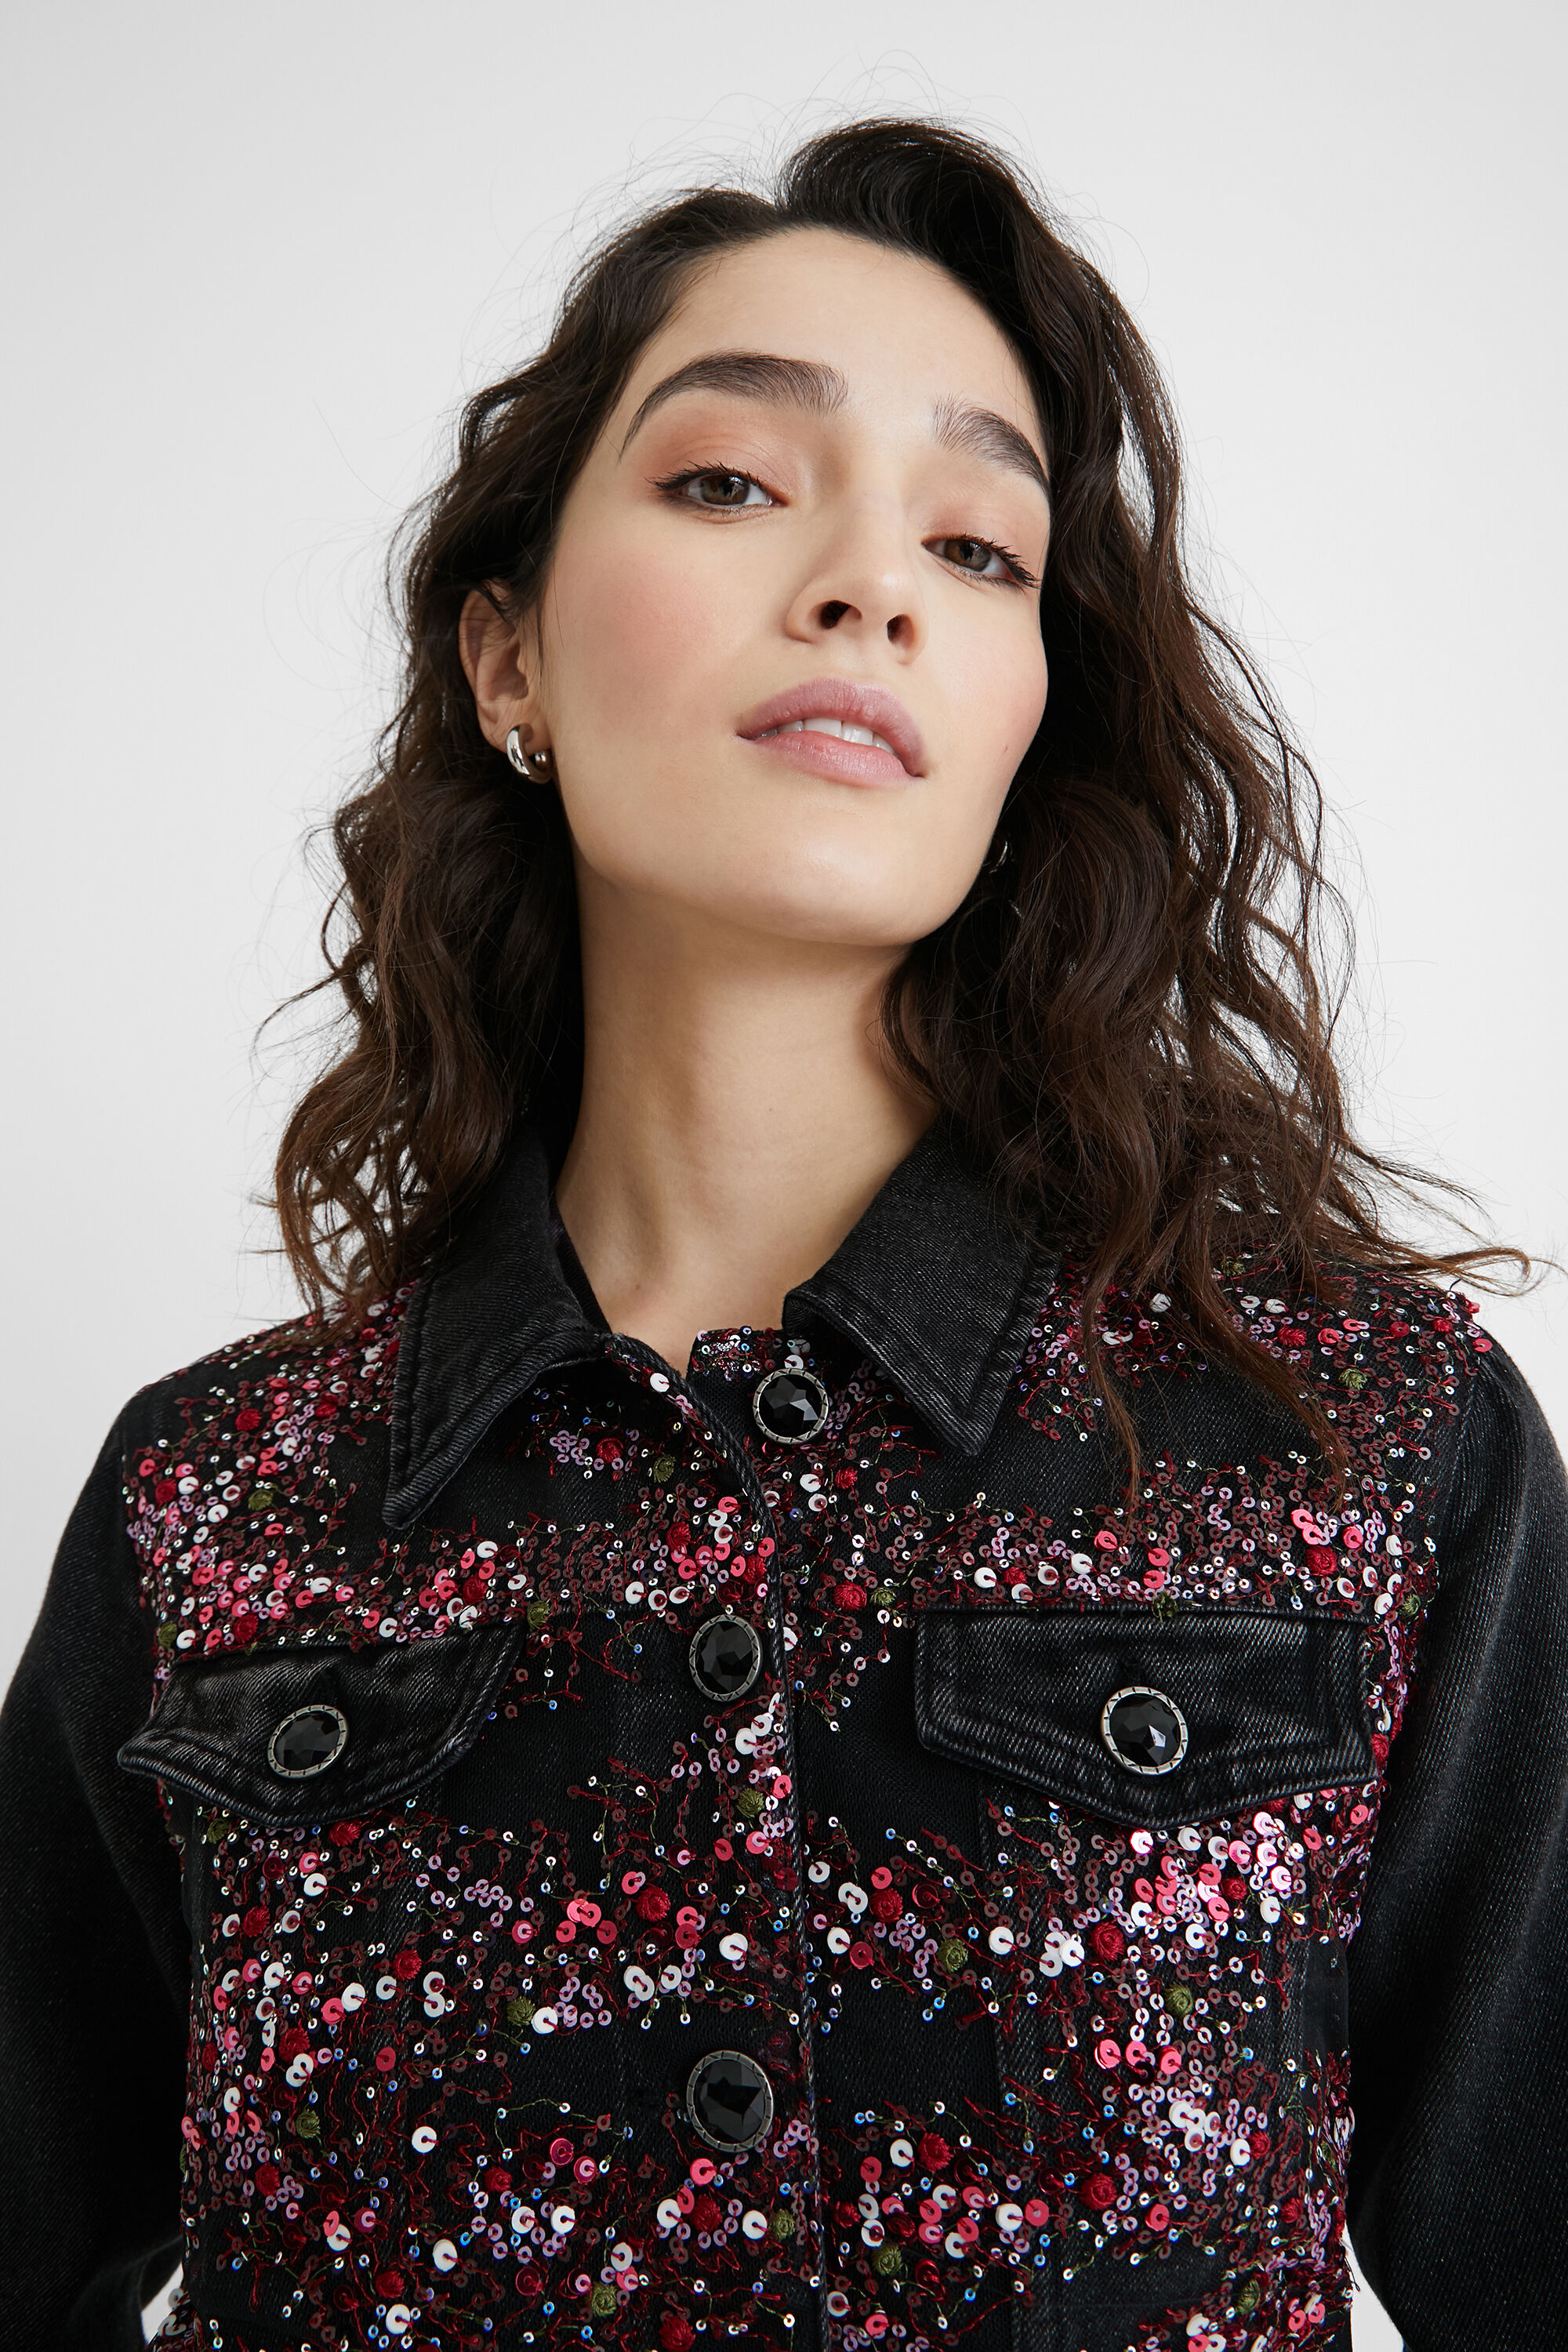 Sequin Rock & Roll Patch Denim Jacket – The Society Marketplace